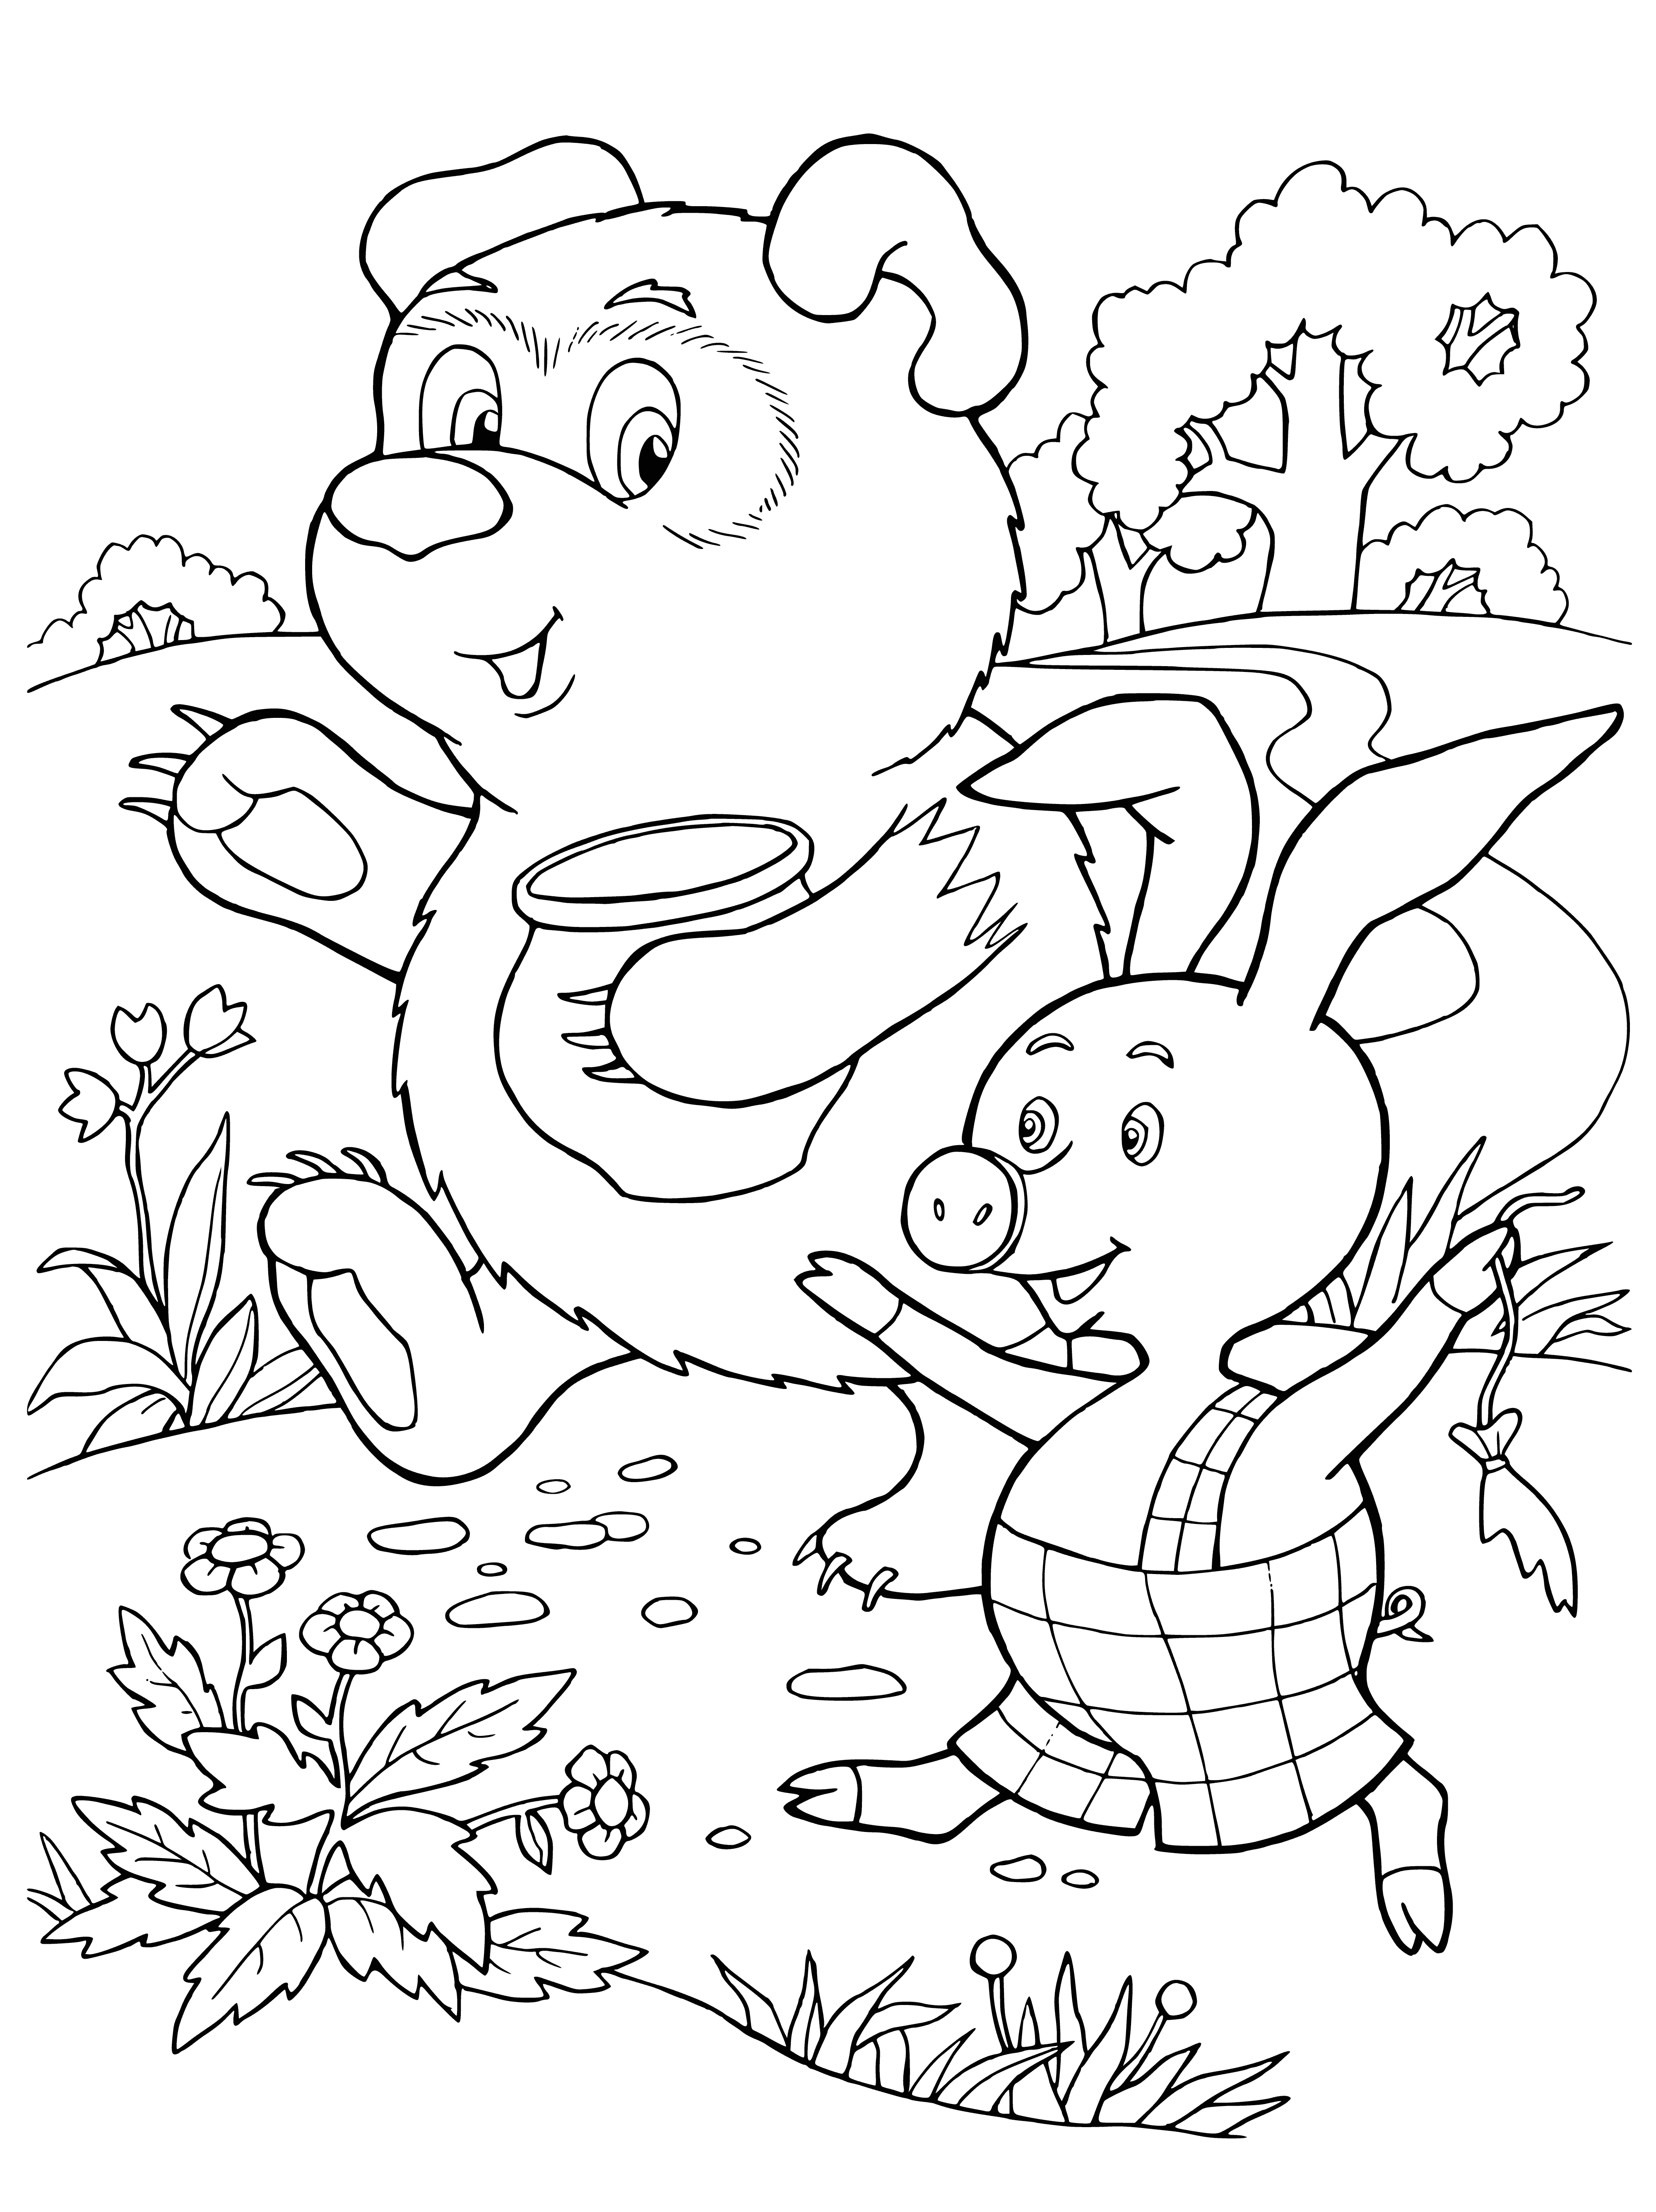 coloring page: Winnie & Piglet walking through a forest w/ trees, blue sky. Winnie's yellow fur & red shirt, Piglet's small & pink w/ a red shirt.